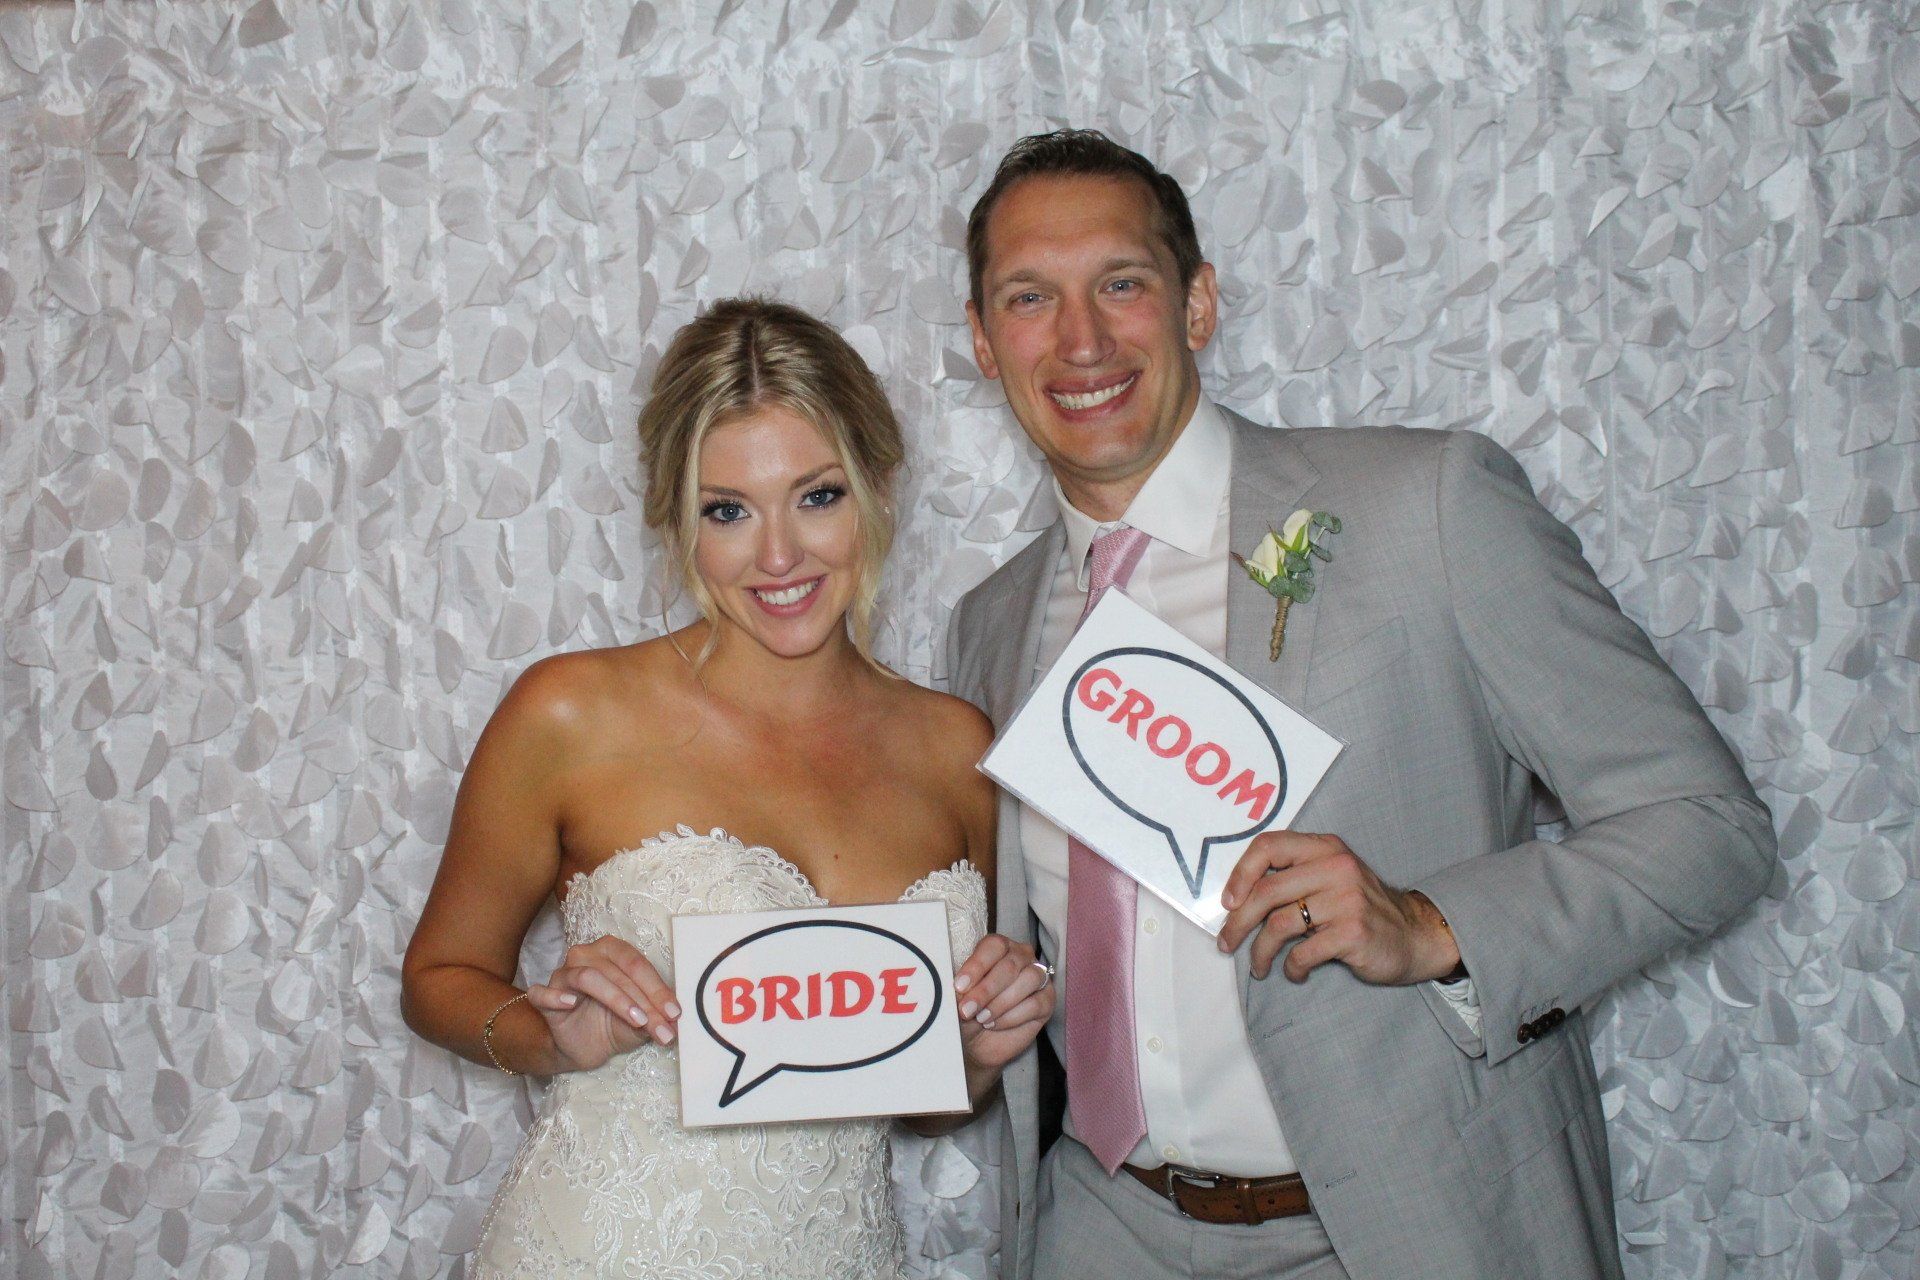 photo booth rentals in NH Maine MA